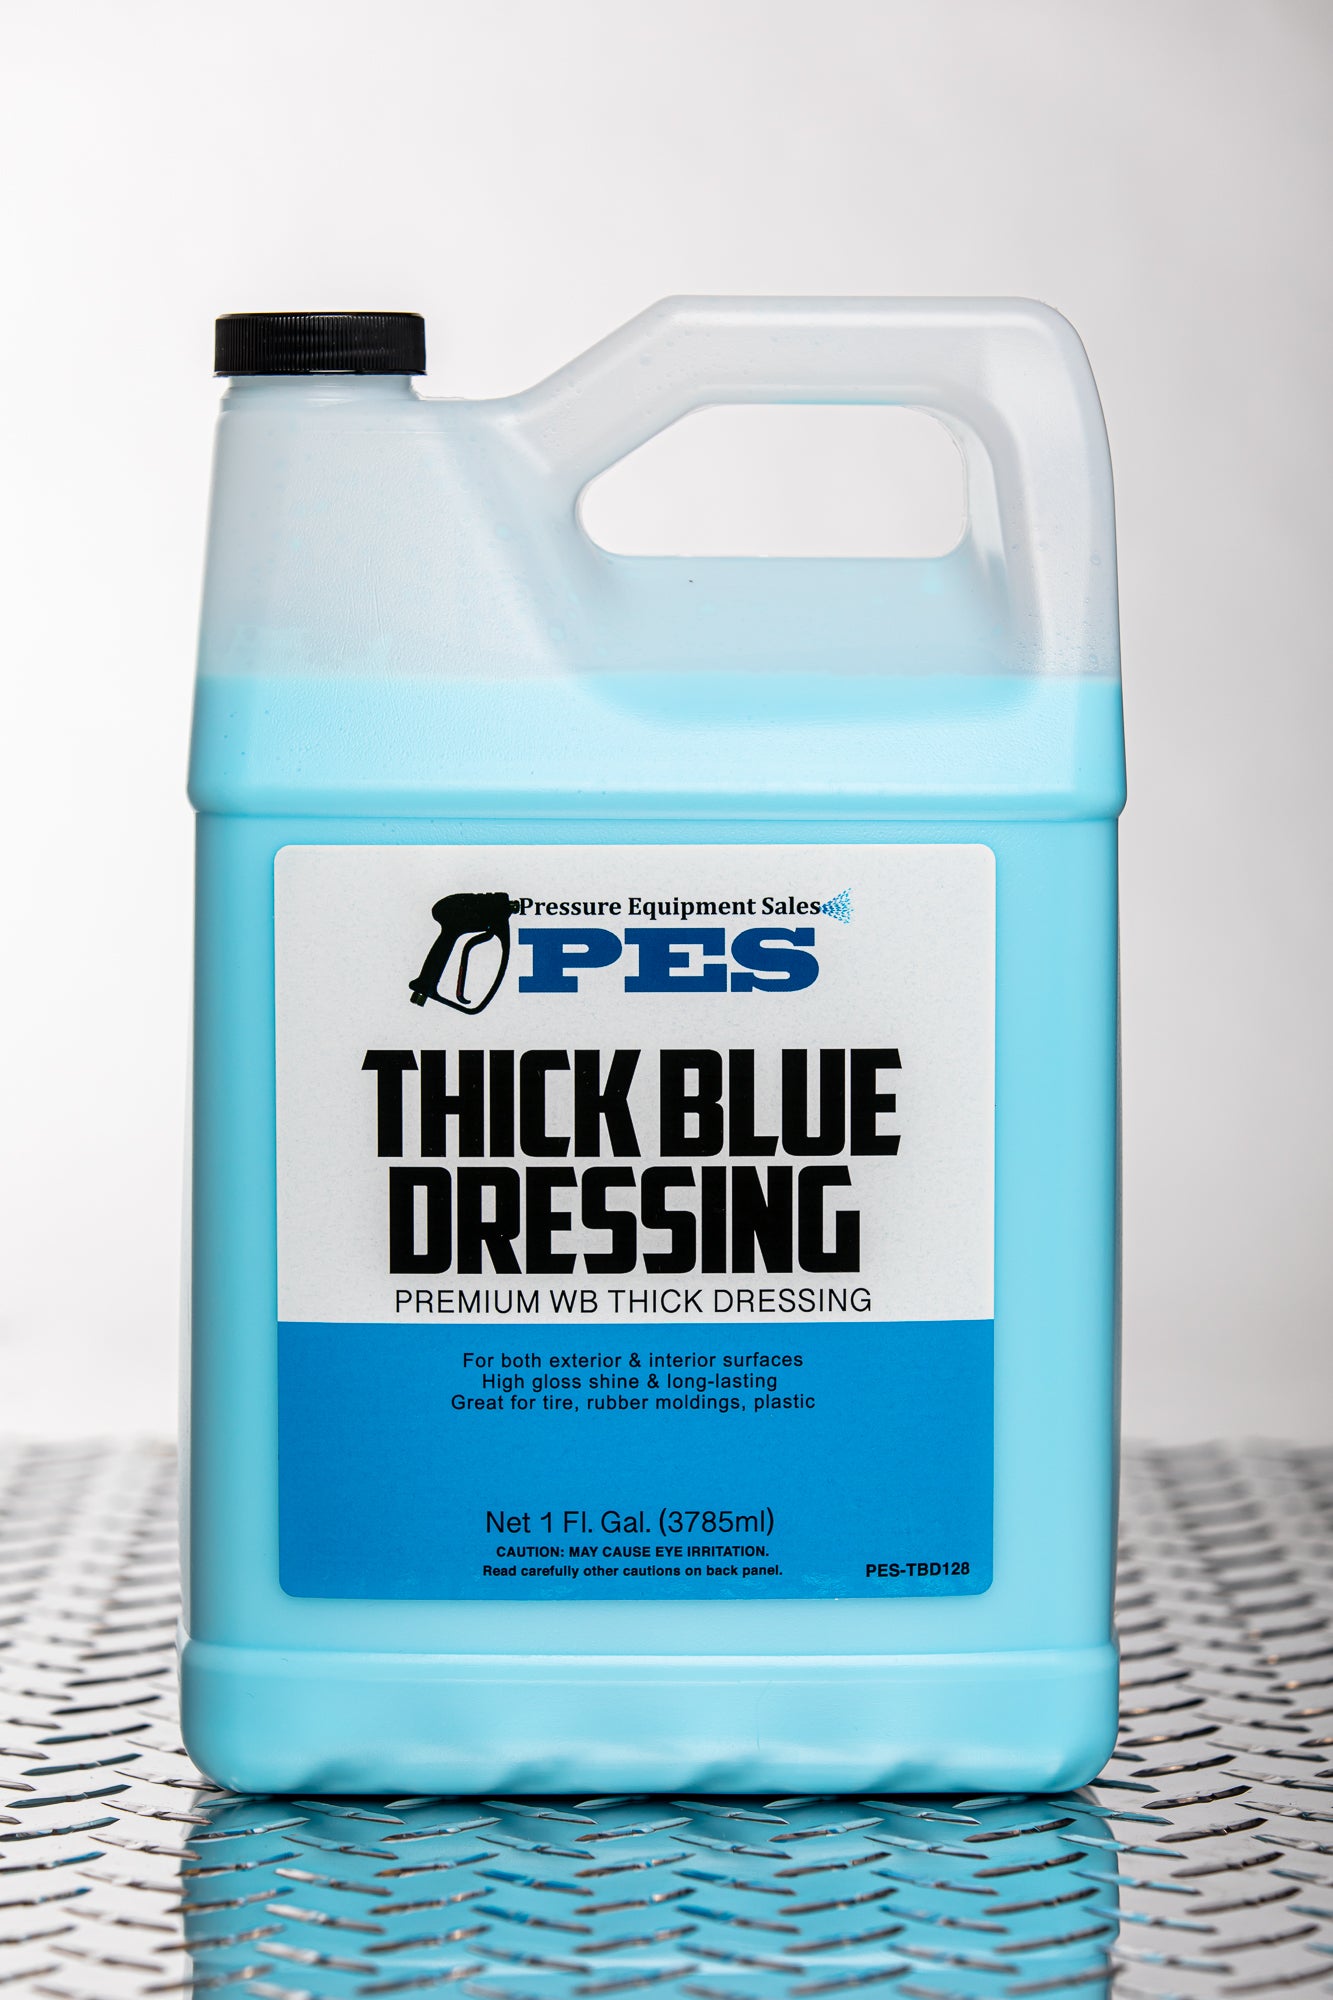 Thick Blue Dressing